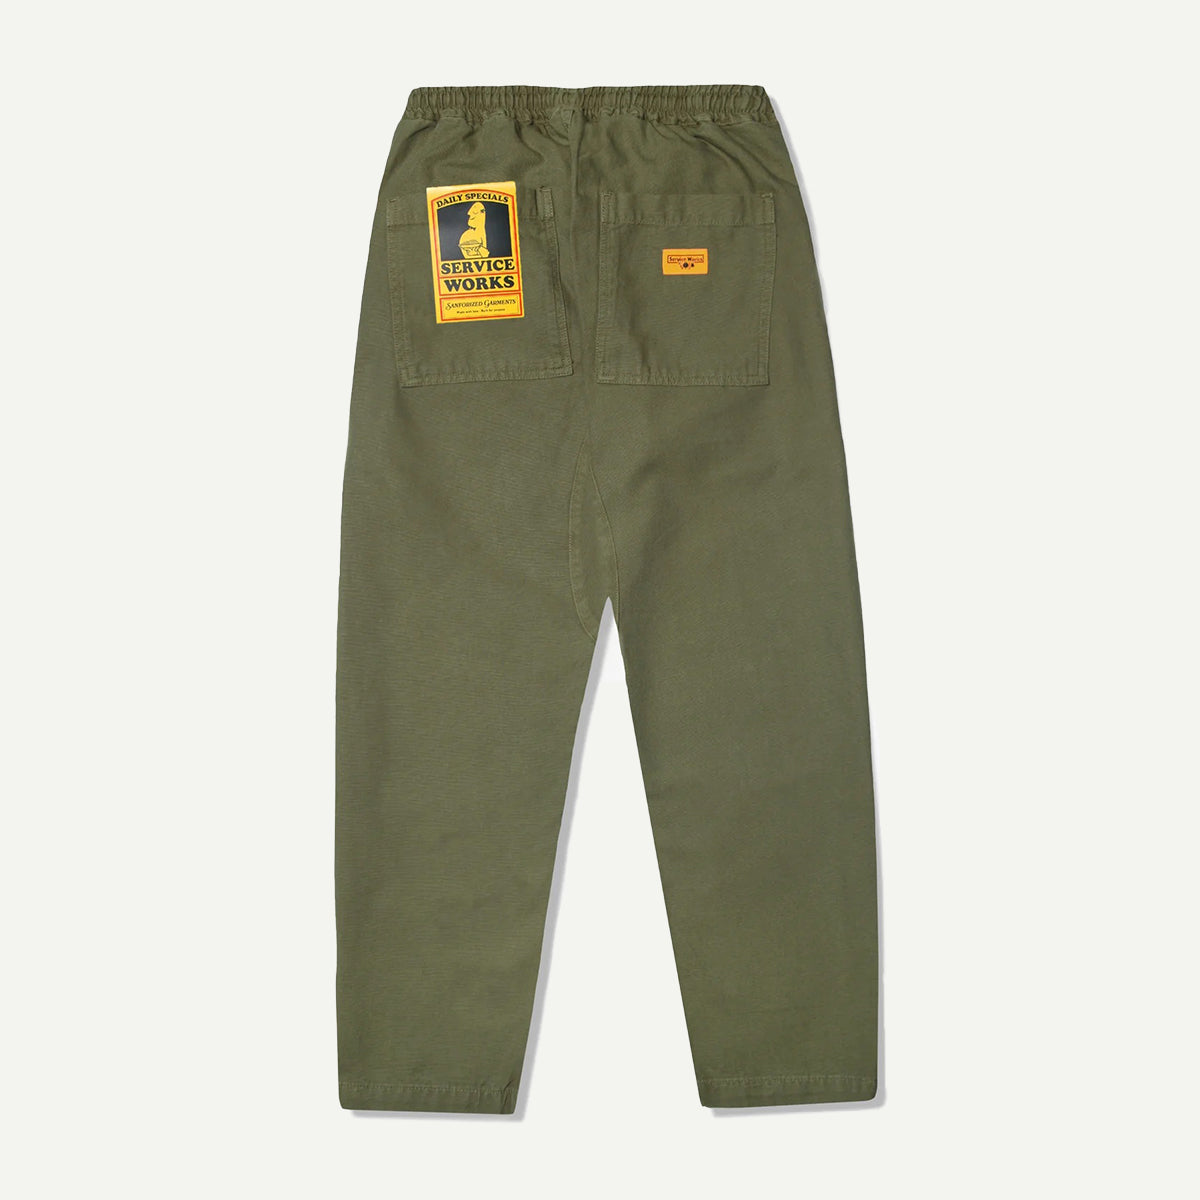 Service Works Olive Canvas Chef Pants